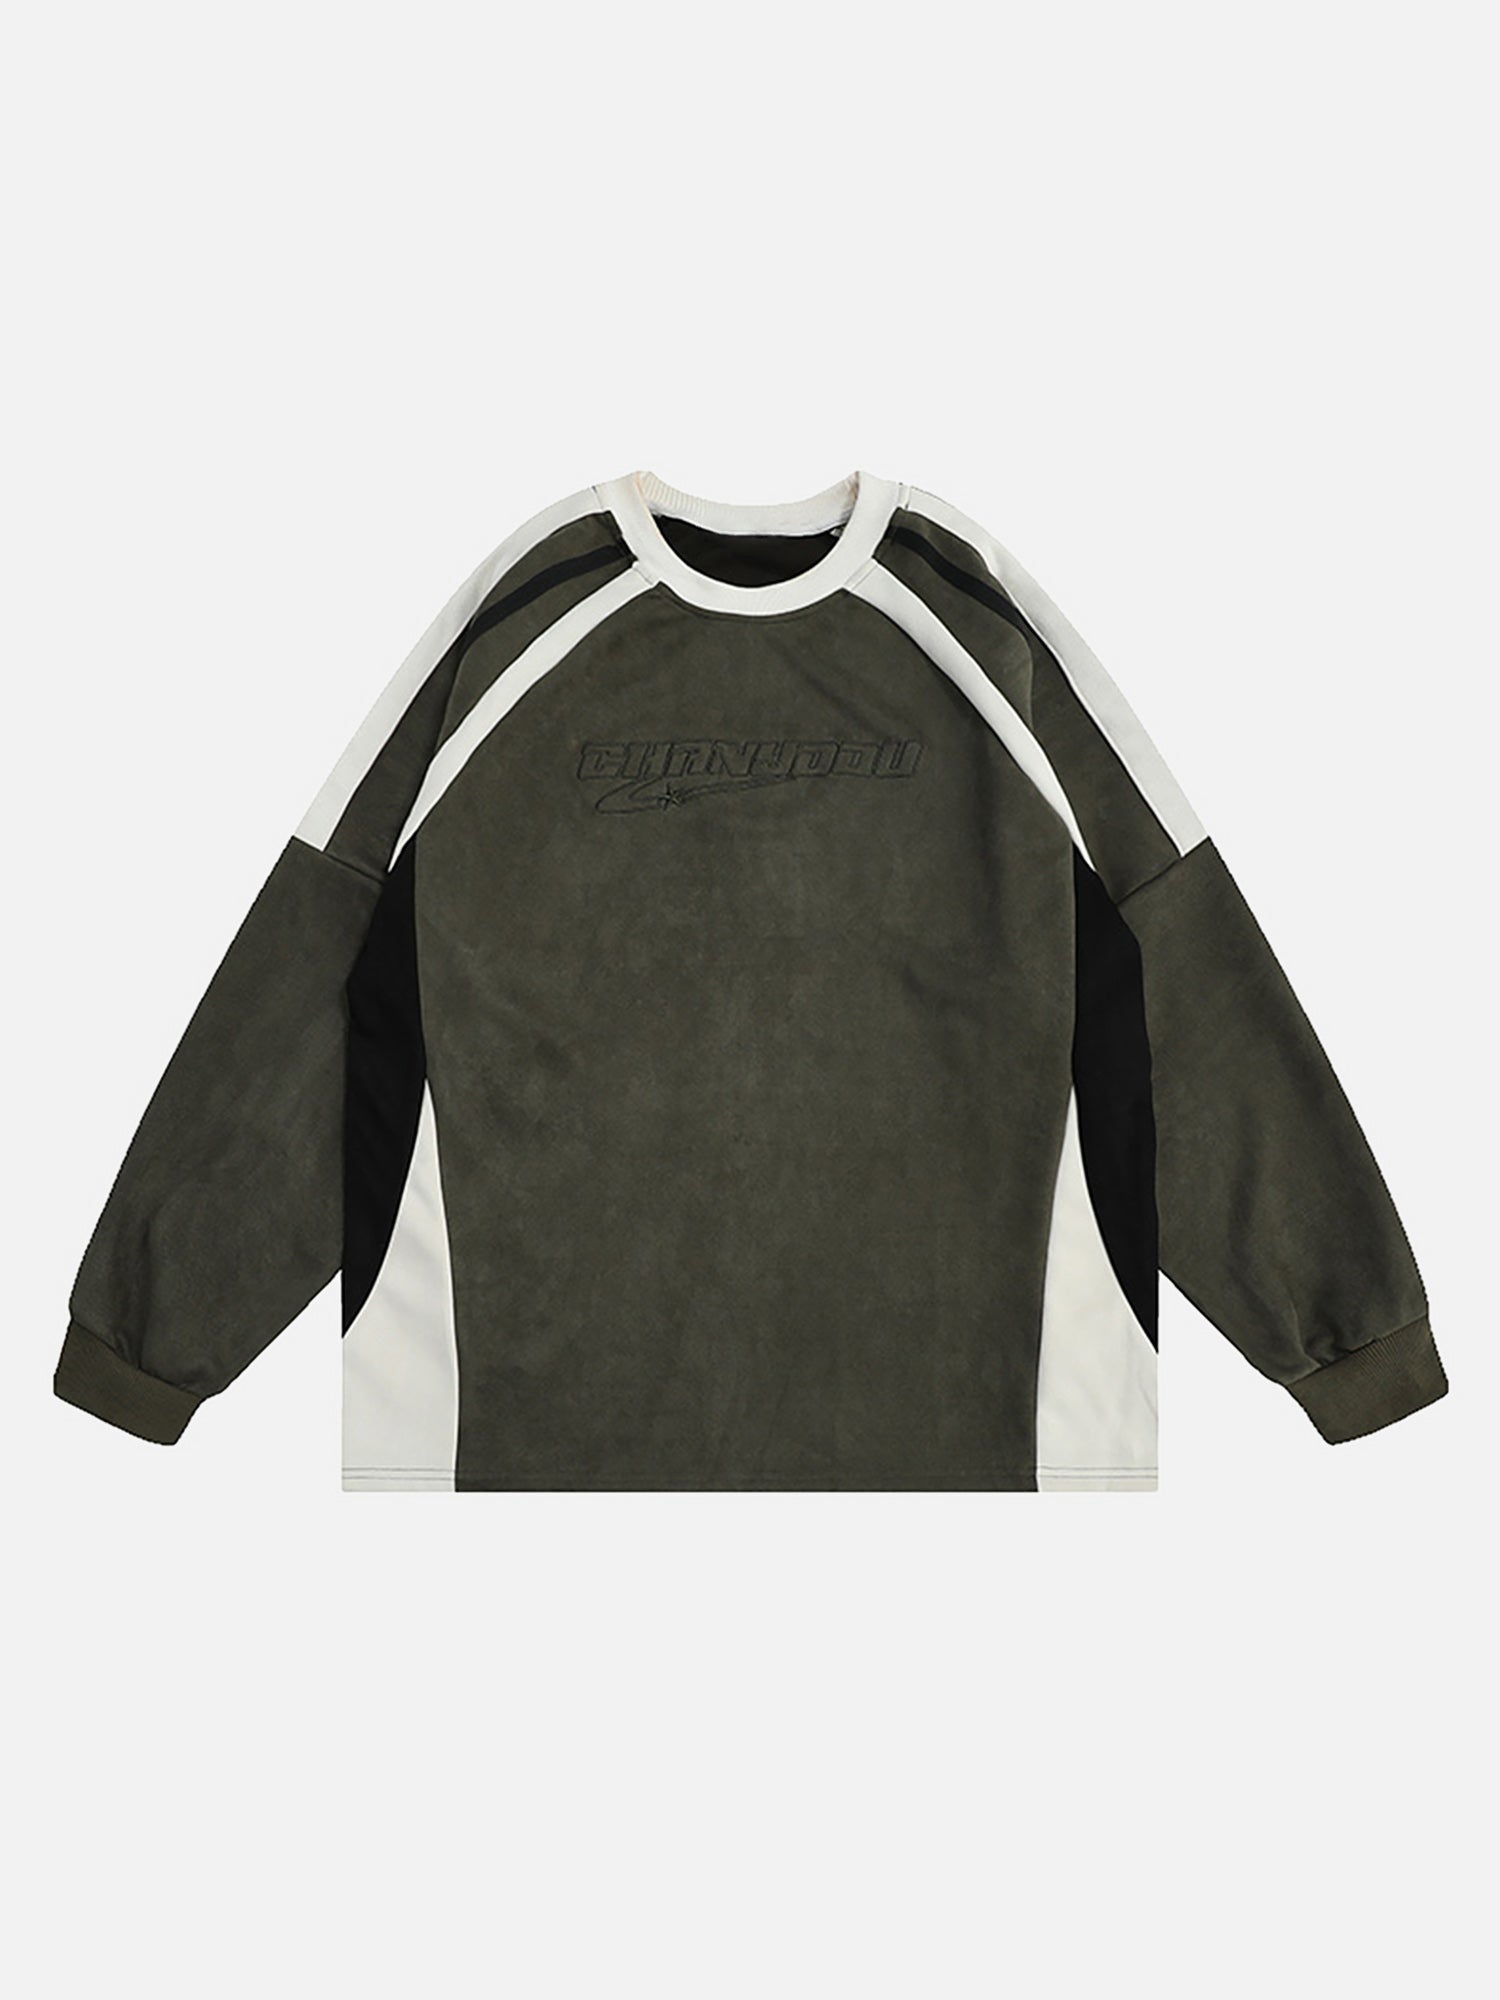 Thesupermade Patchwork Contrasting Two-tone Raglan Embroidered Sweatshirt